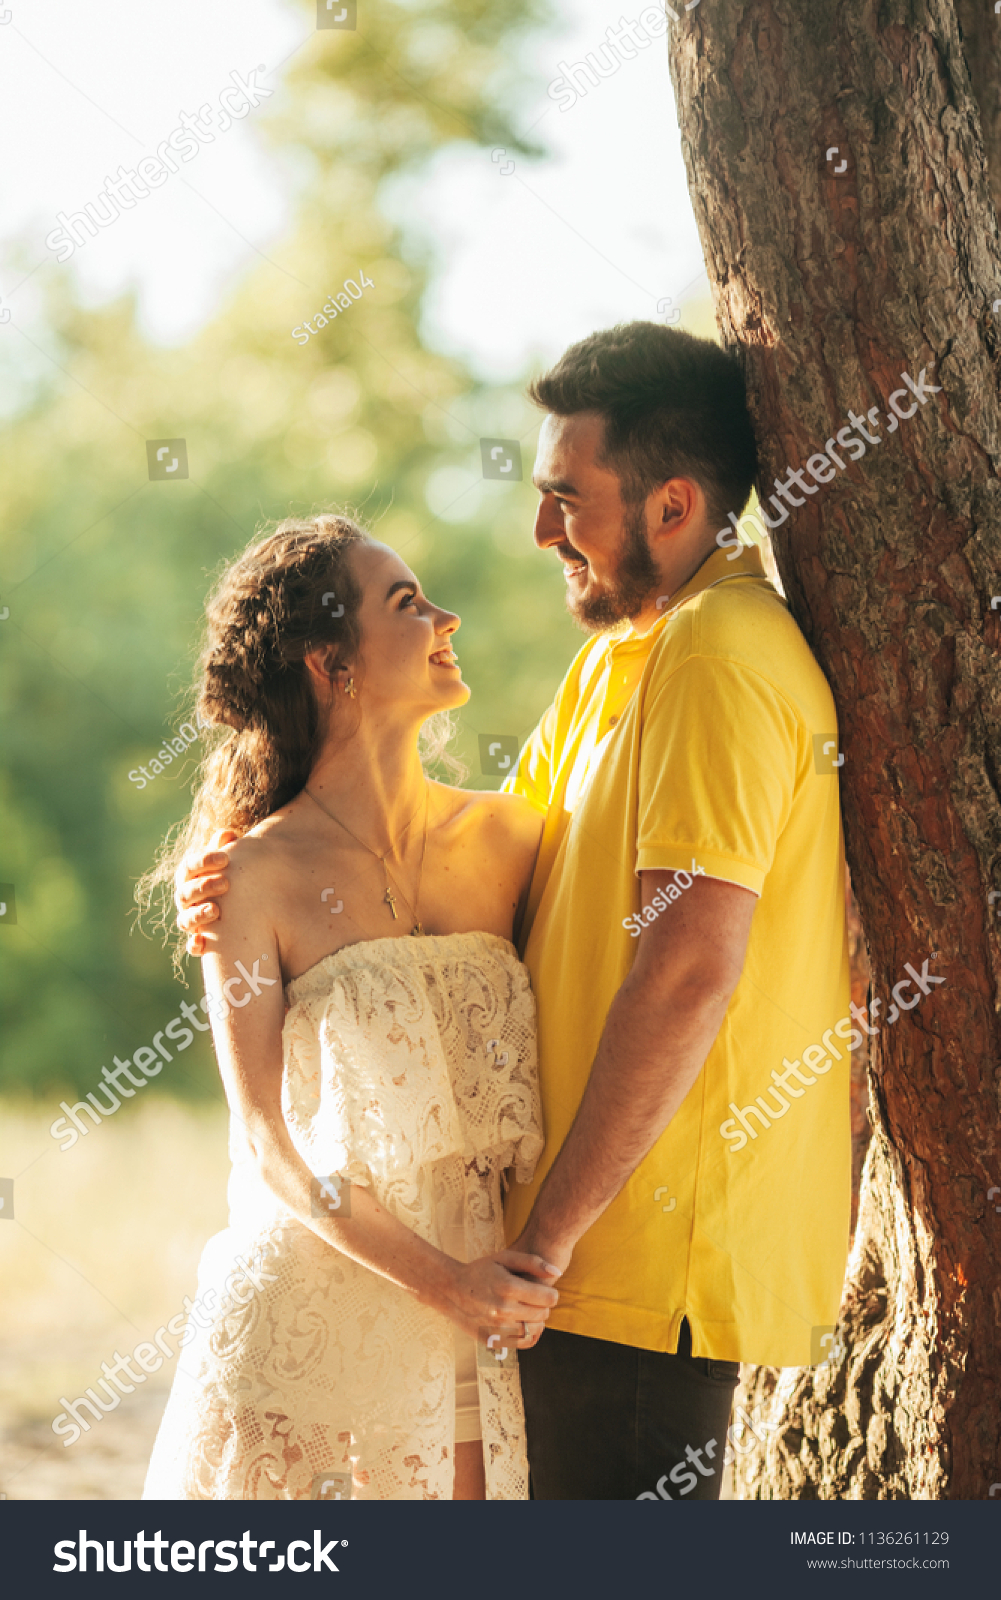 Young enamored couple smiles, hugs and holds hands in forest against background of tree. #1136261129